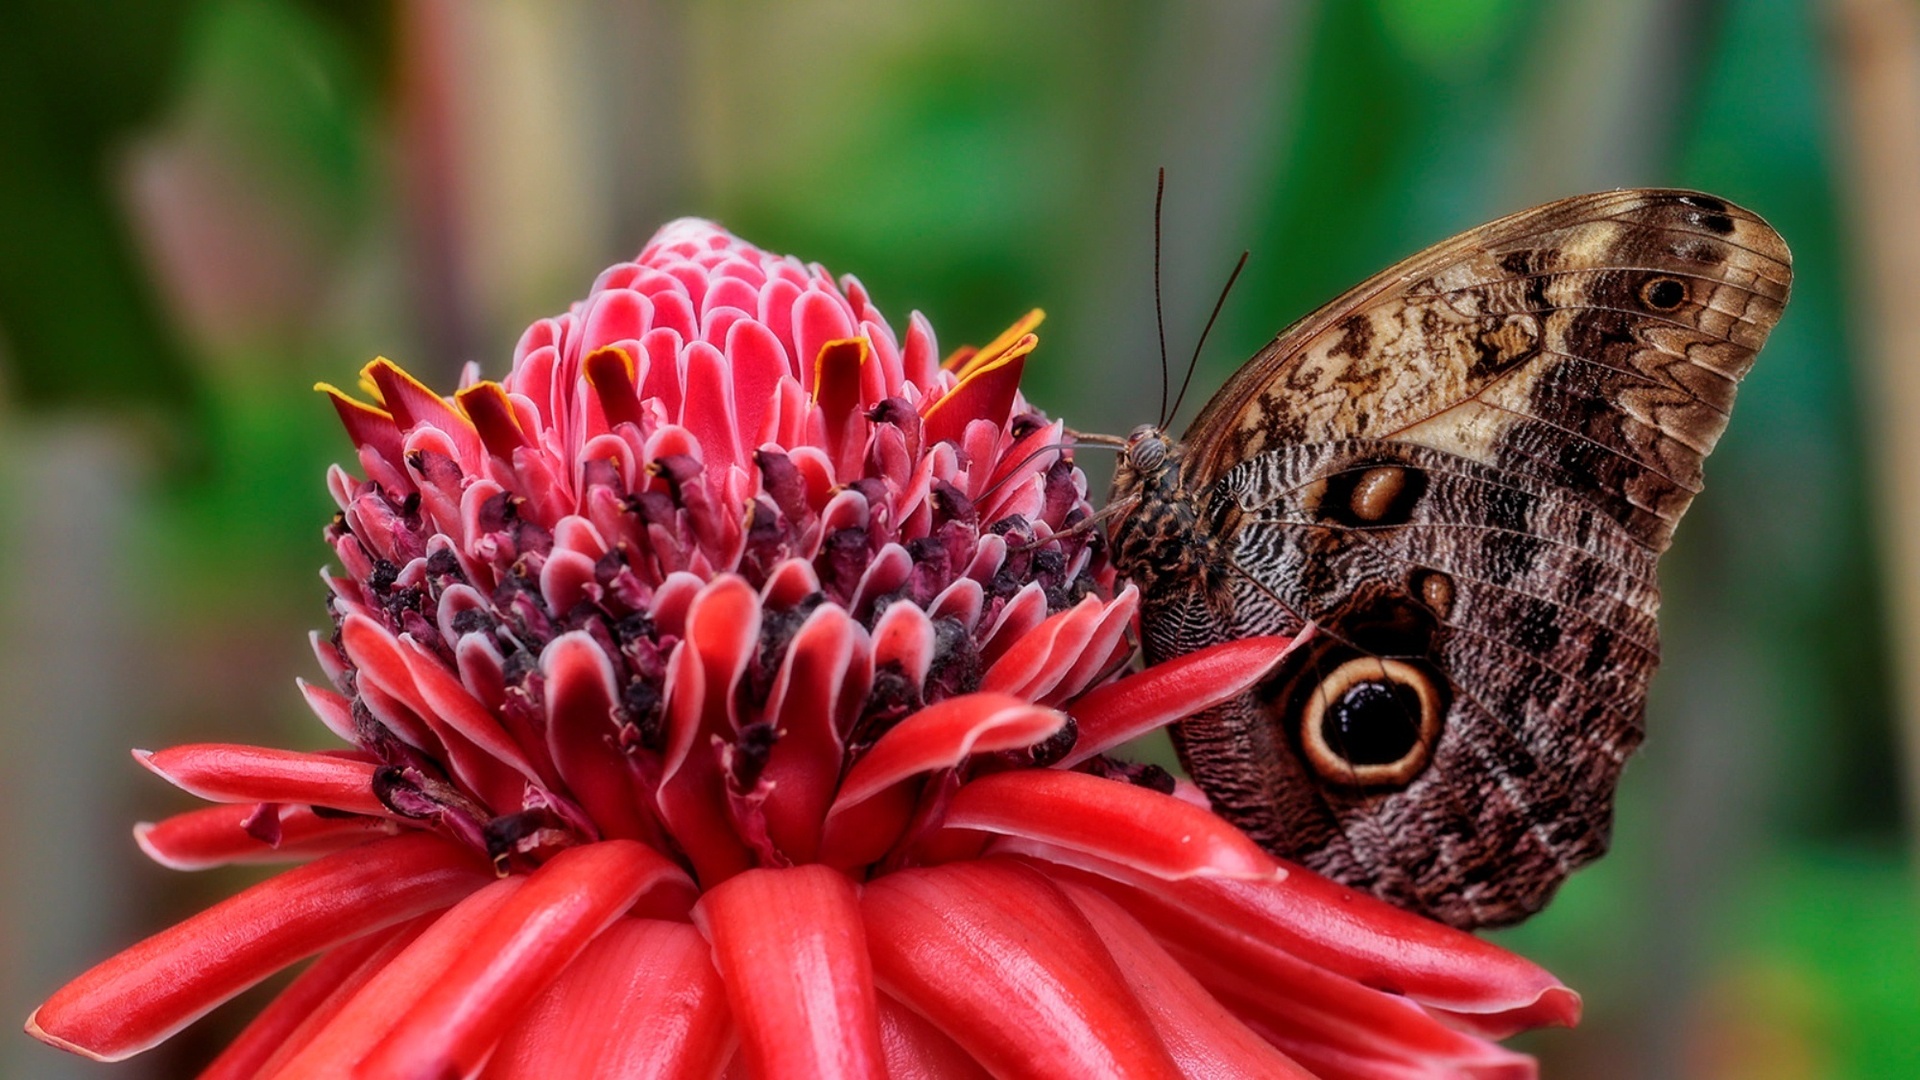 animals, Insects, Nature, Butterflies, Wings, Flowers, Red, Closeup close up Wallpaper